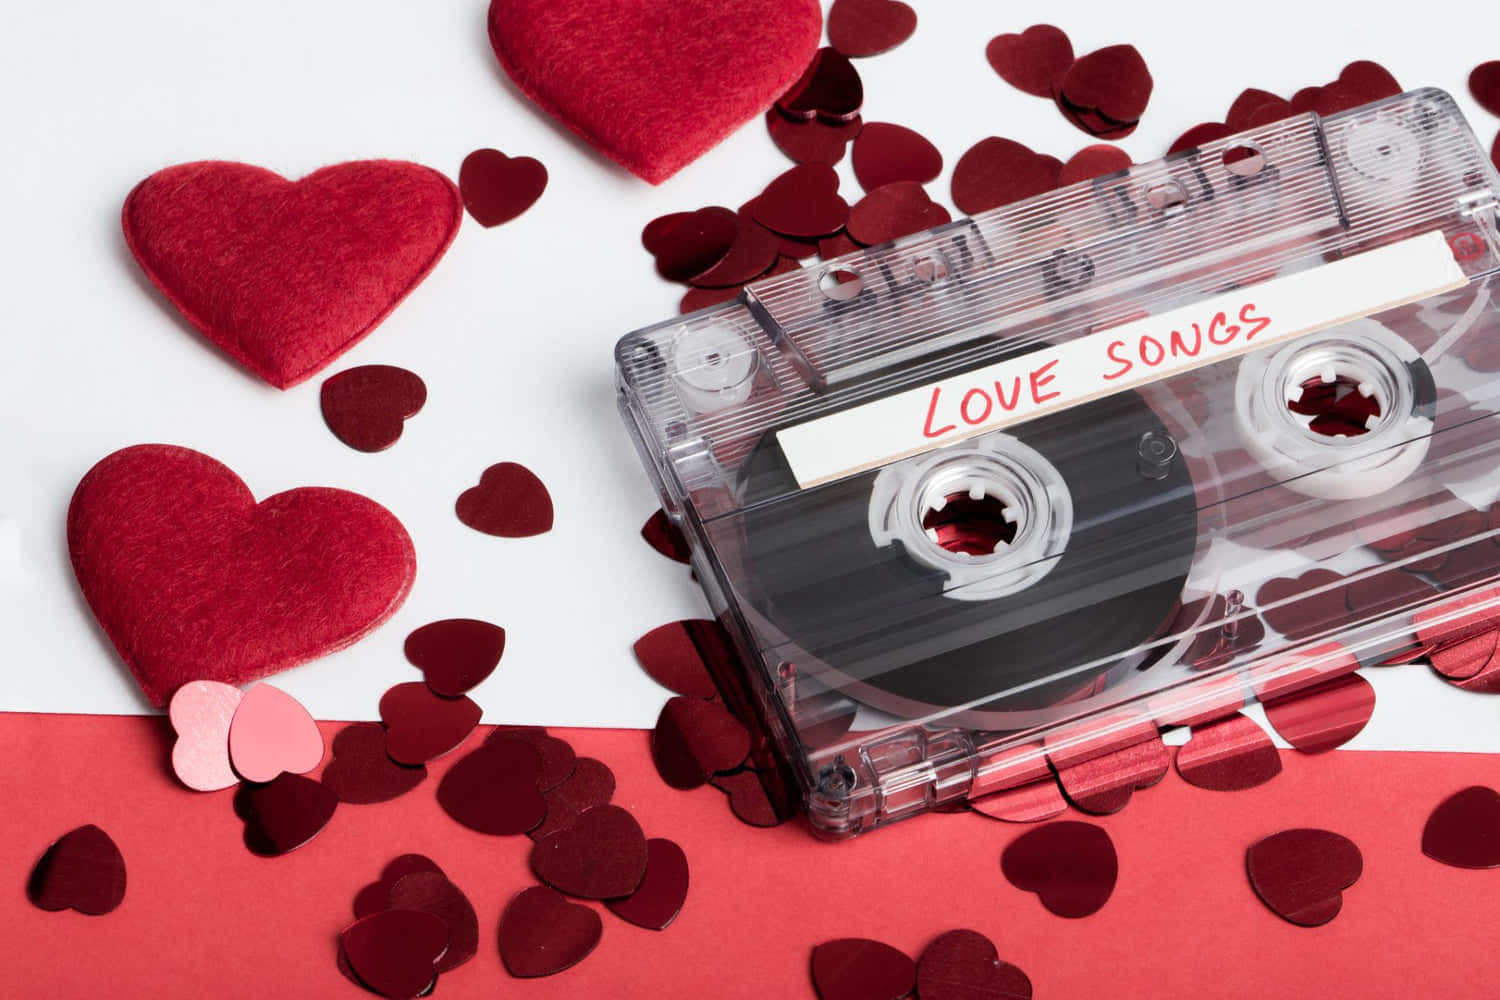 Love Songs Cassette Tape Valentine's Day Pictures 1500 x 1000 Picture